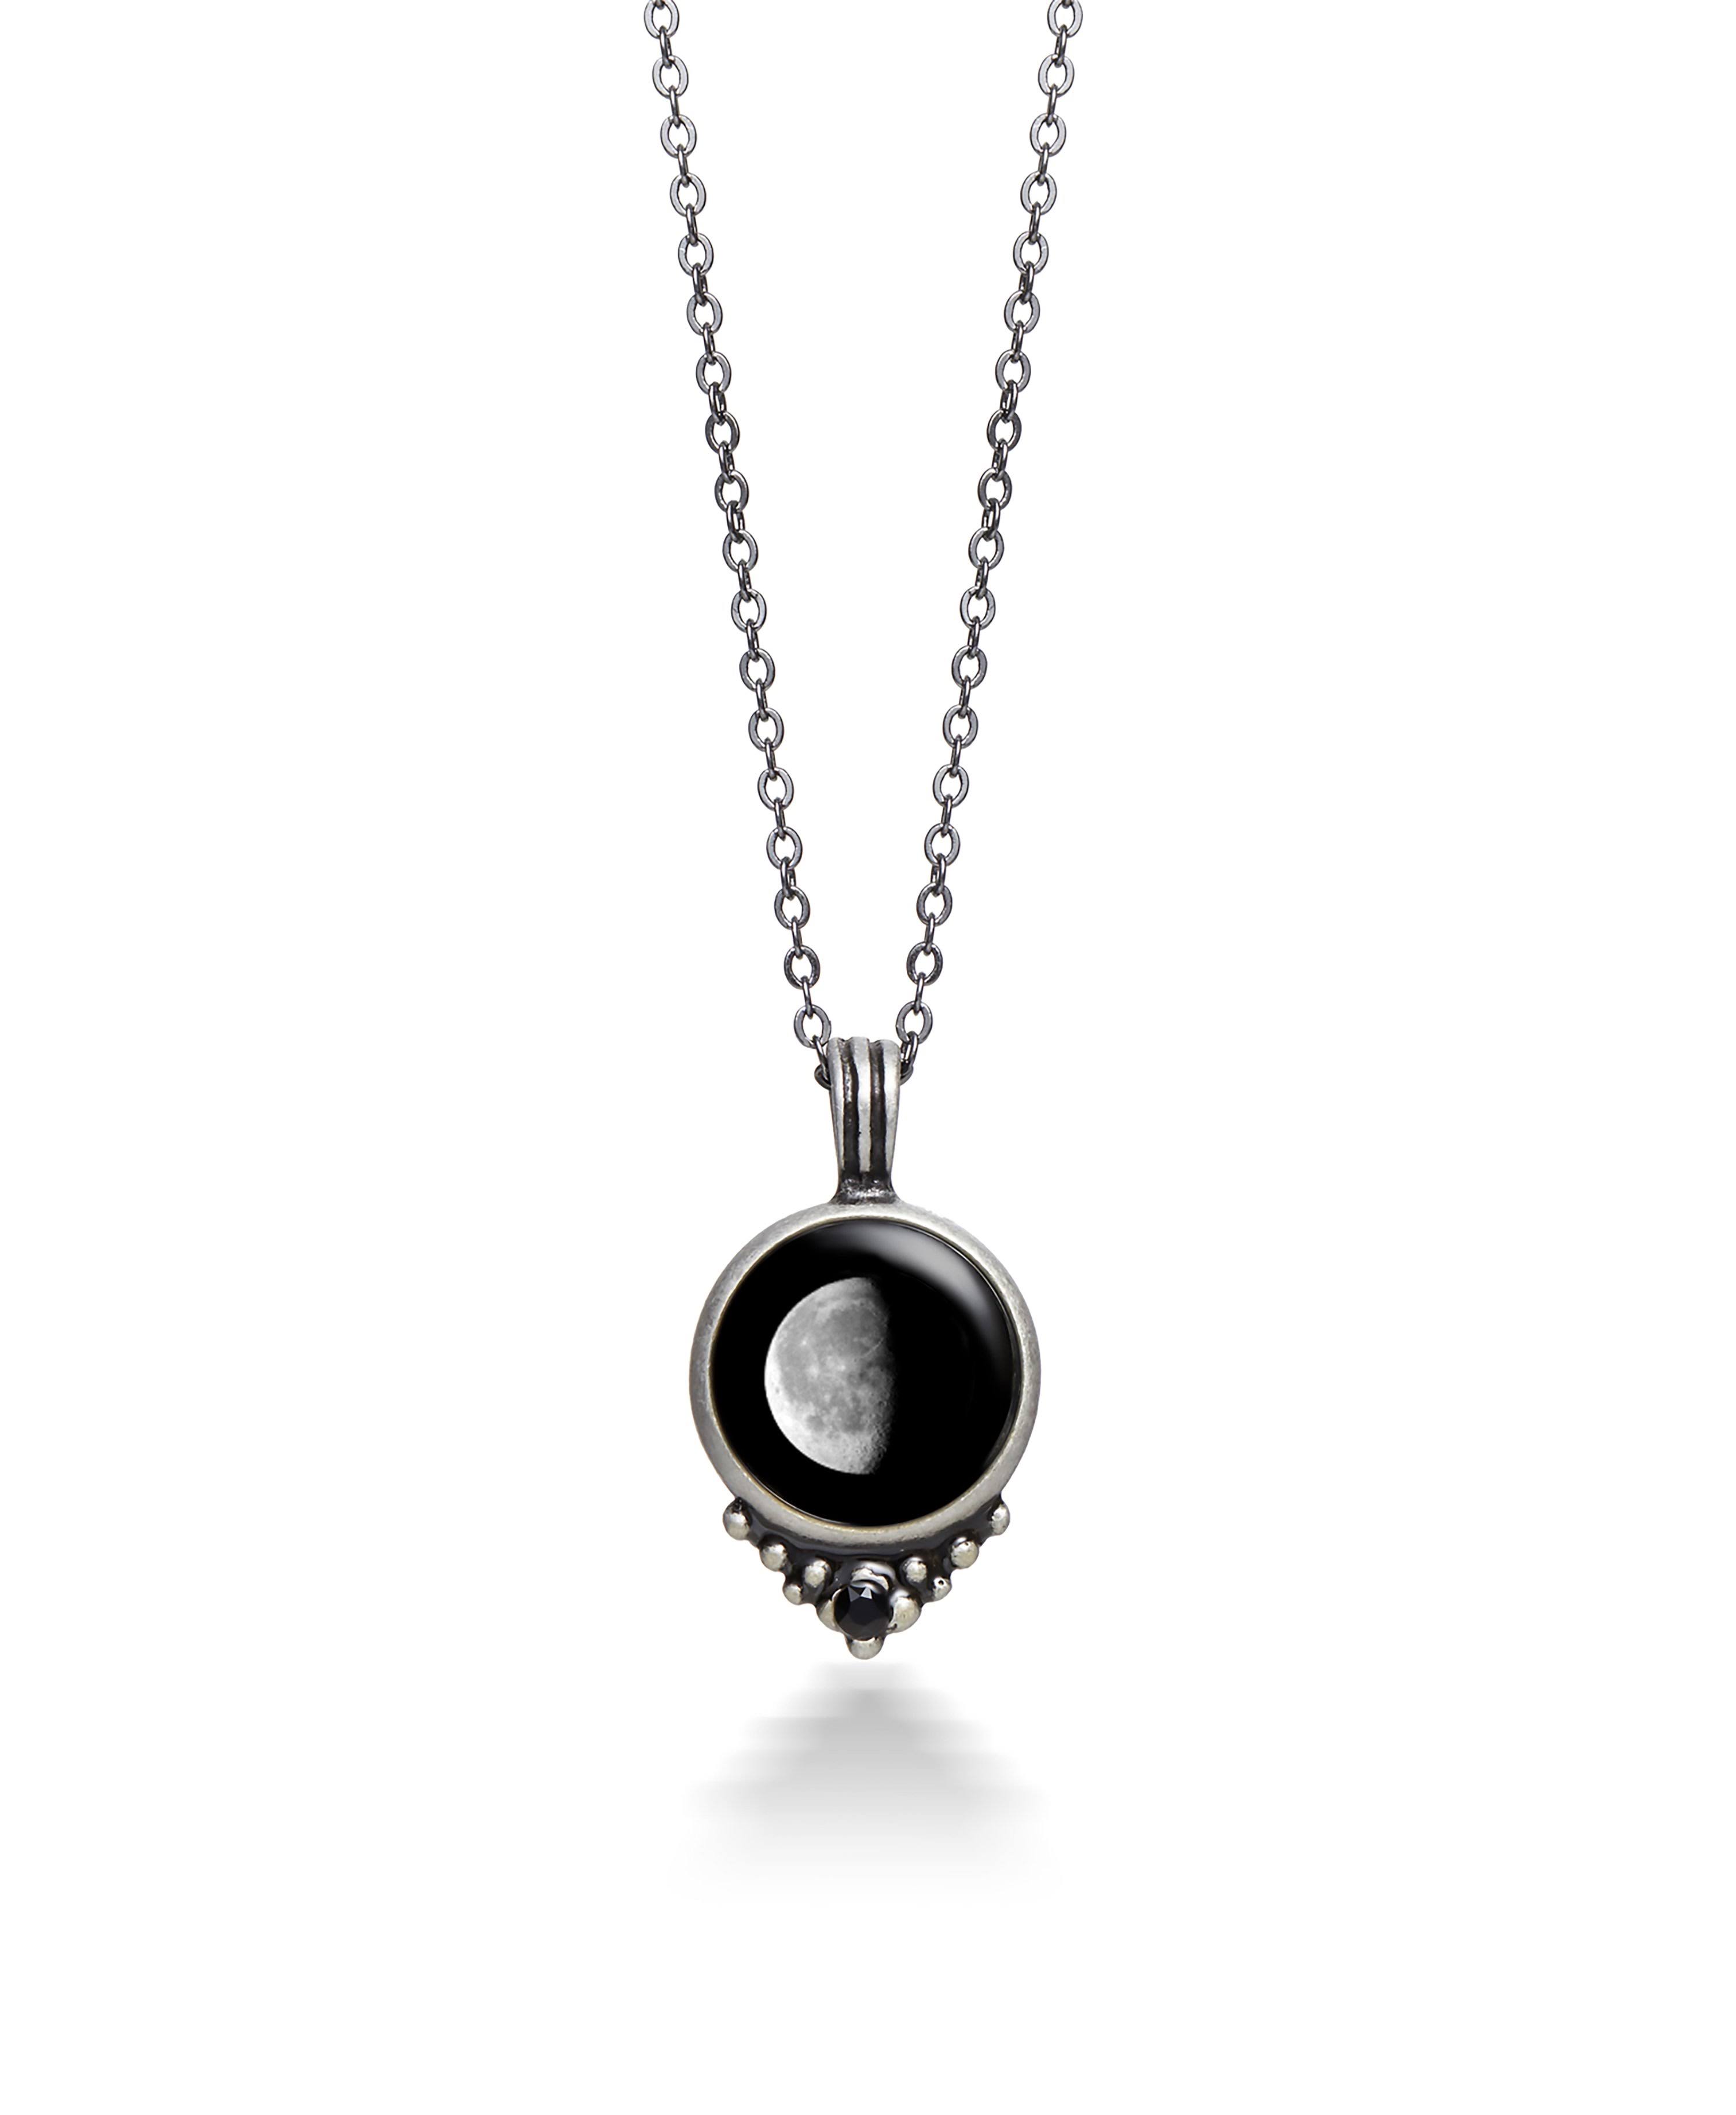 Moonglow Pewter Necklace 5D